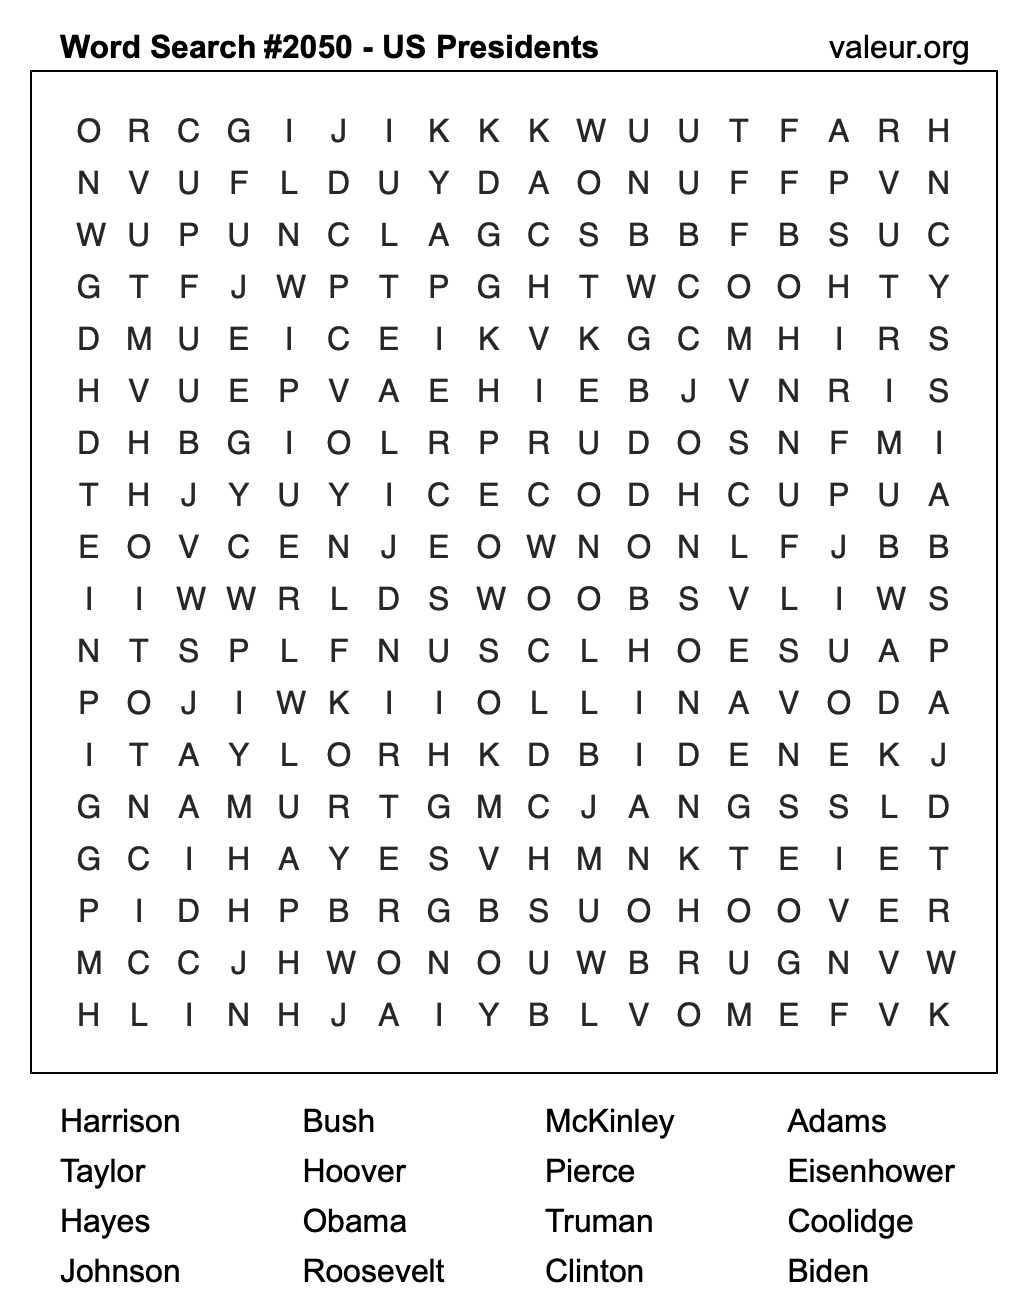 Word Search Puzzle with US Presidents #2050